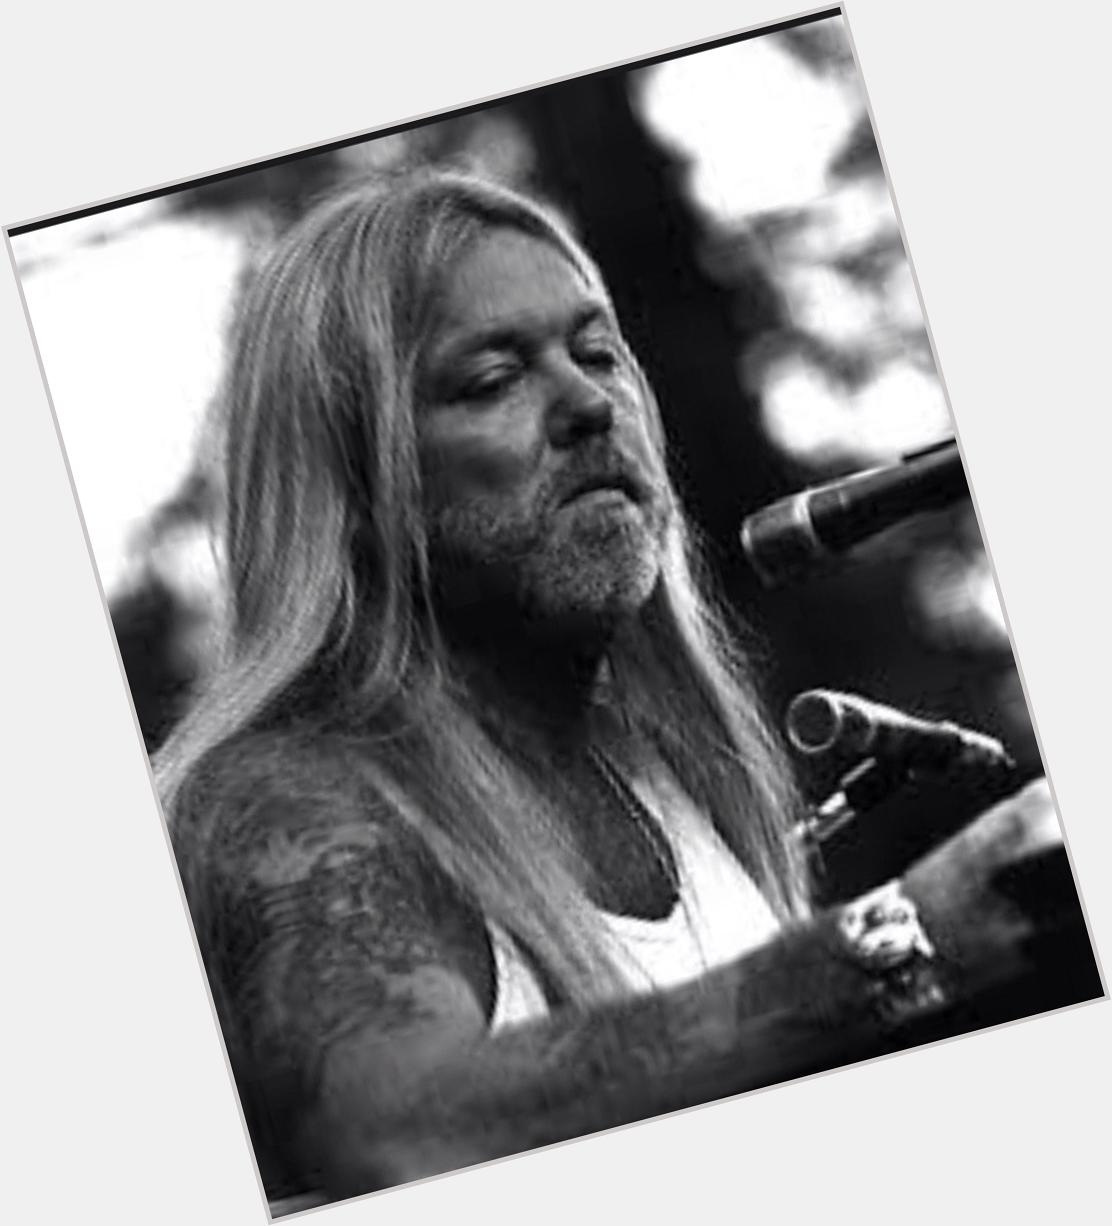 12/8/1947 Happy Birthday, Gregg Allman, singer, songwriter and keyboards in The Allman Brothers Band 